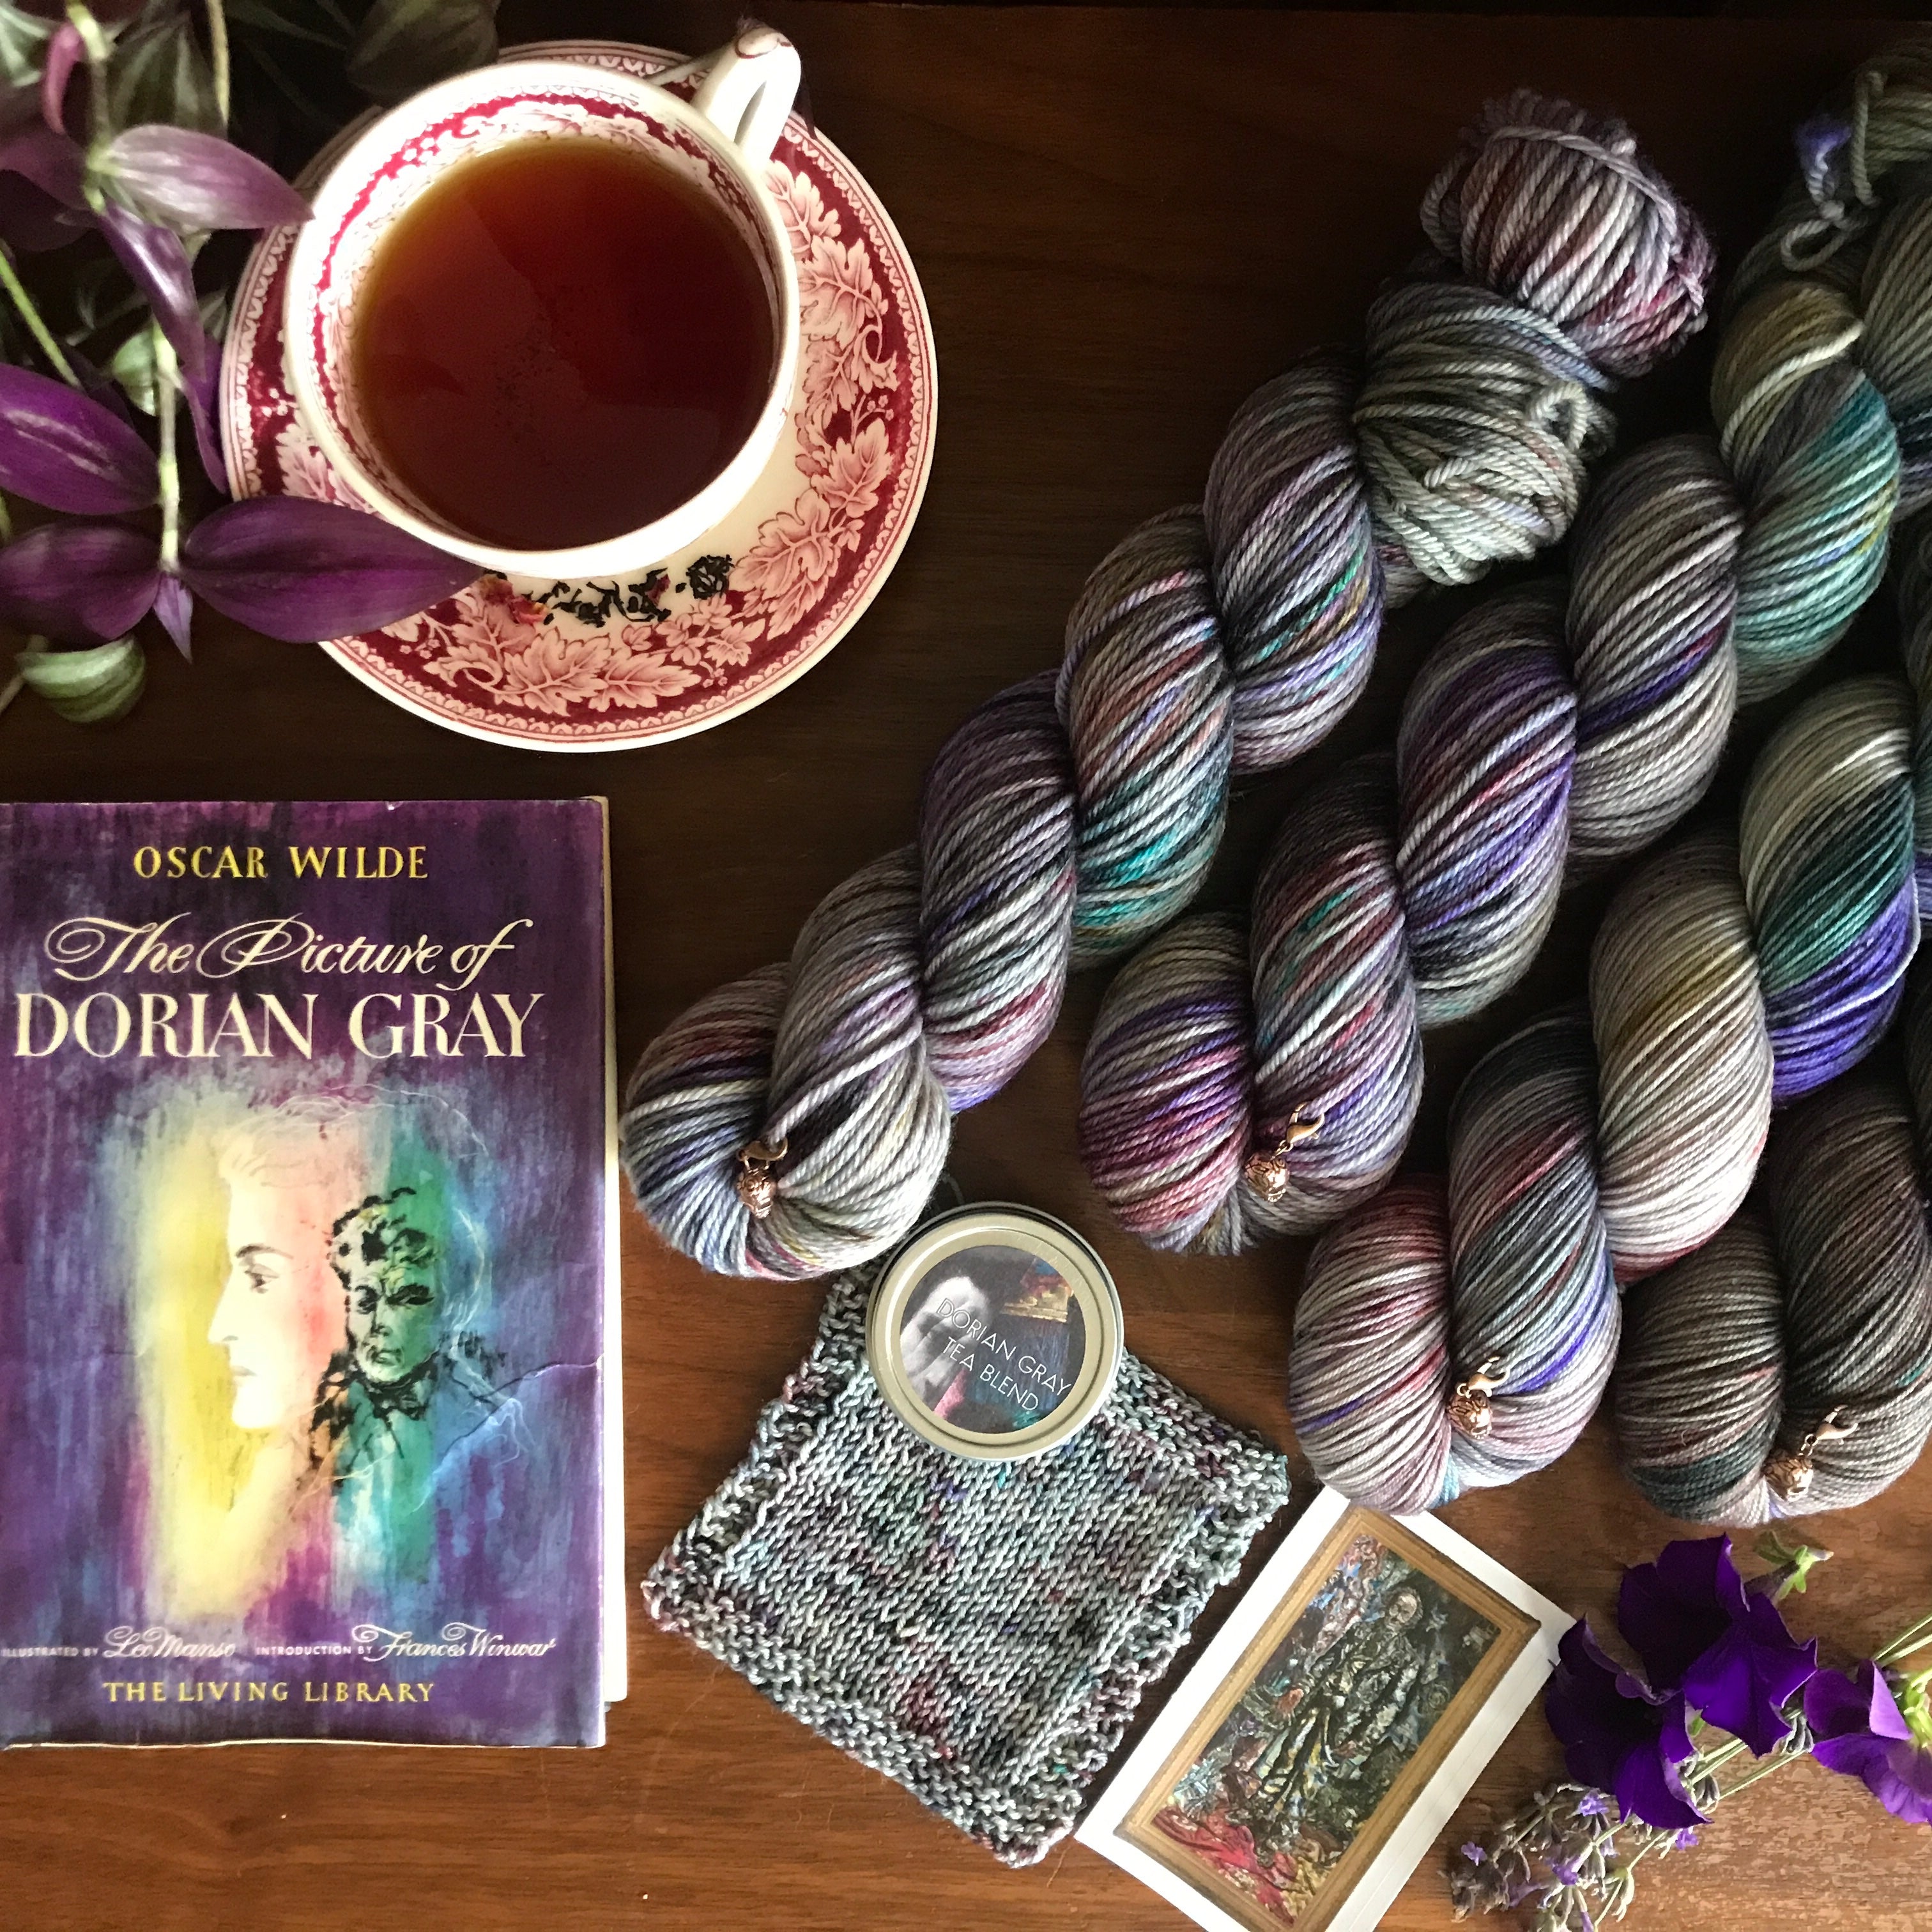 Yarn club inspired by The Picture of Dorian Gray features a floral-gray hand dyed yarn, rose petal infused tea, and skull progress keeper.